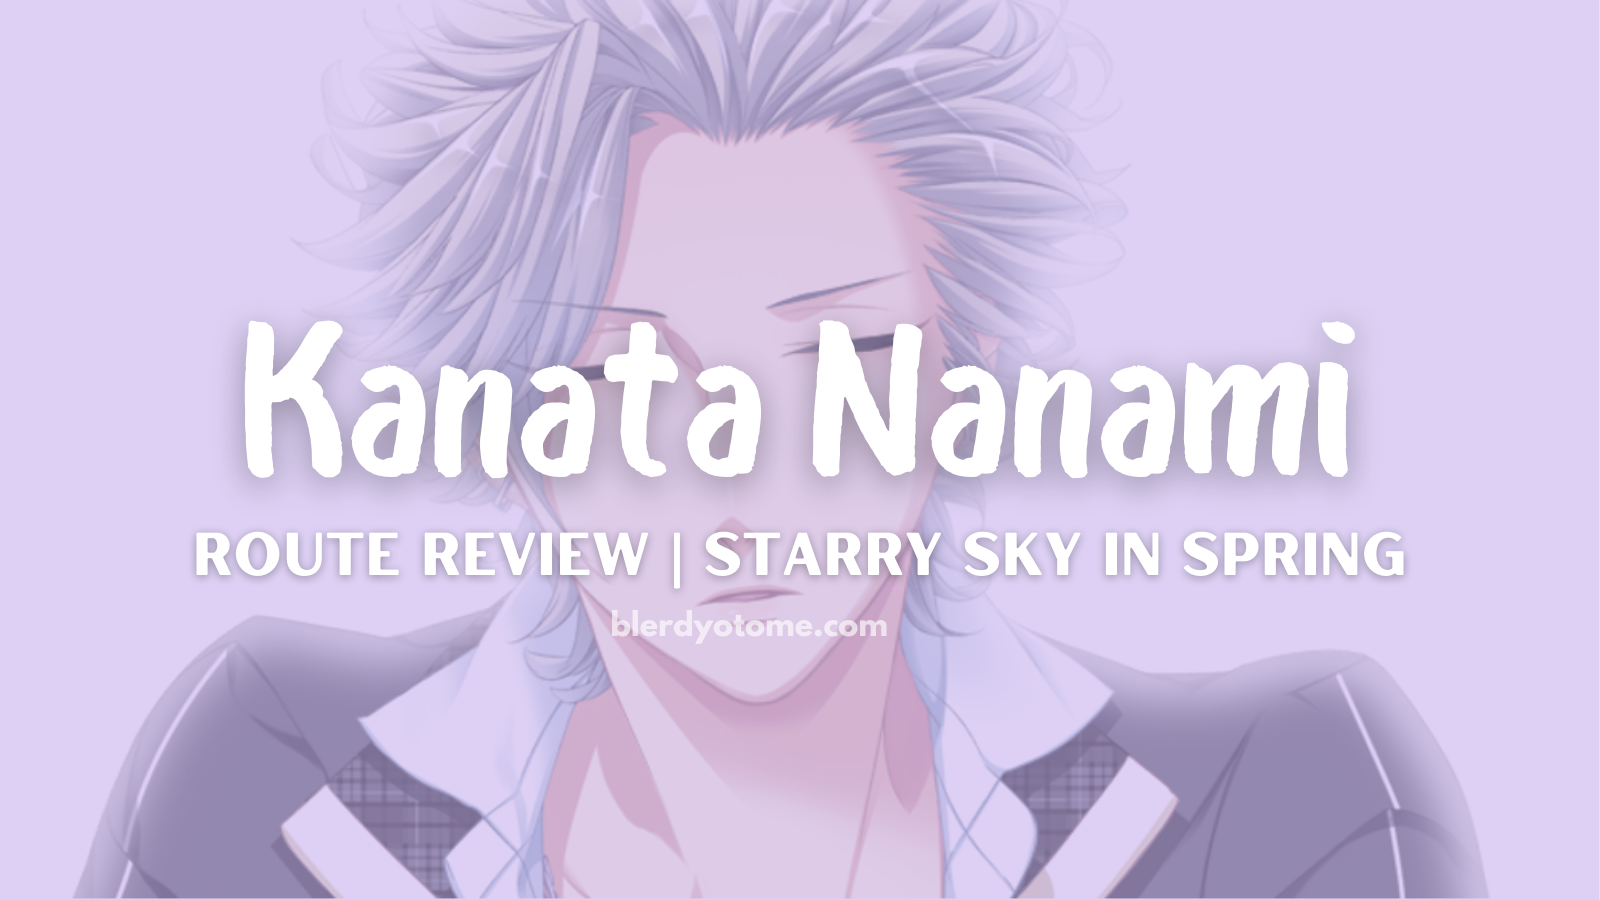 Starry Sky in Spring | Kanata Review: The Guy I Like is a Pisces